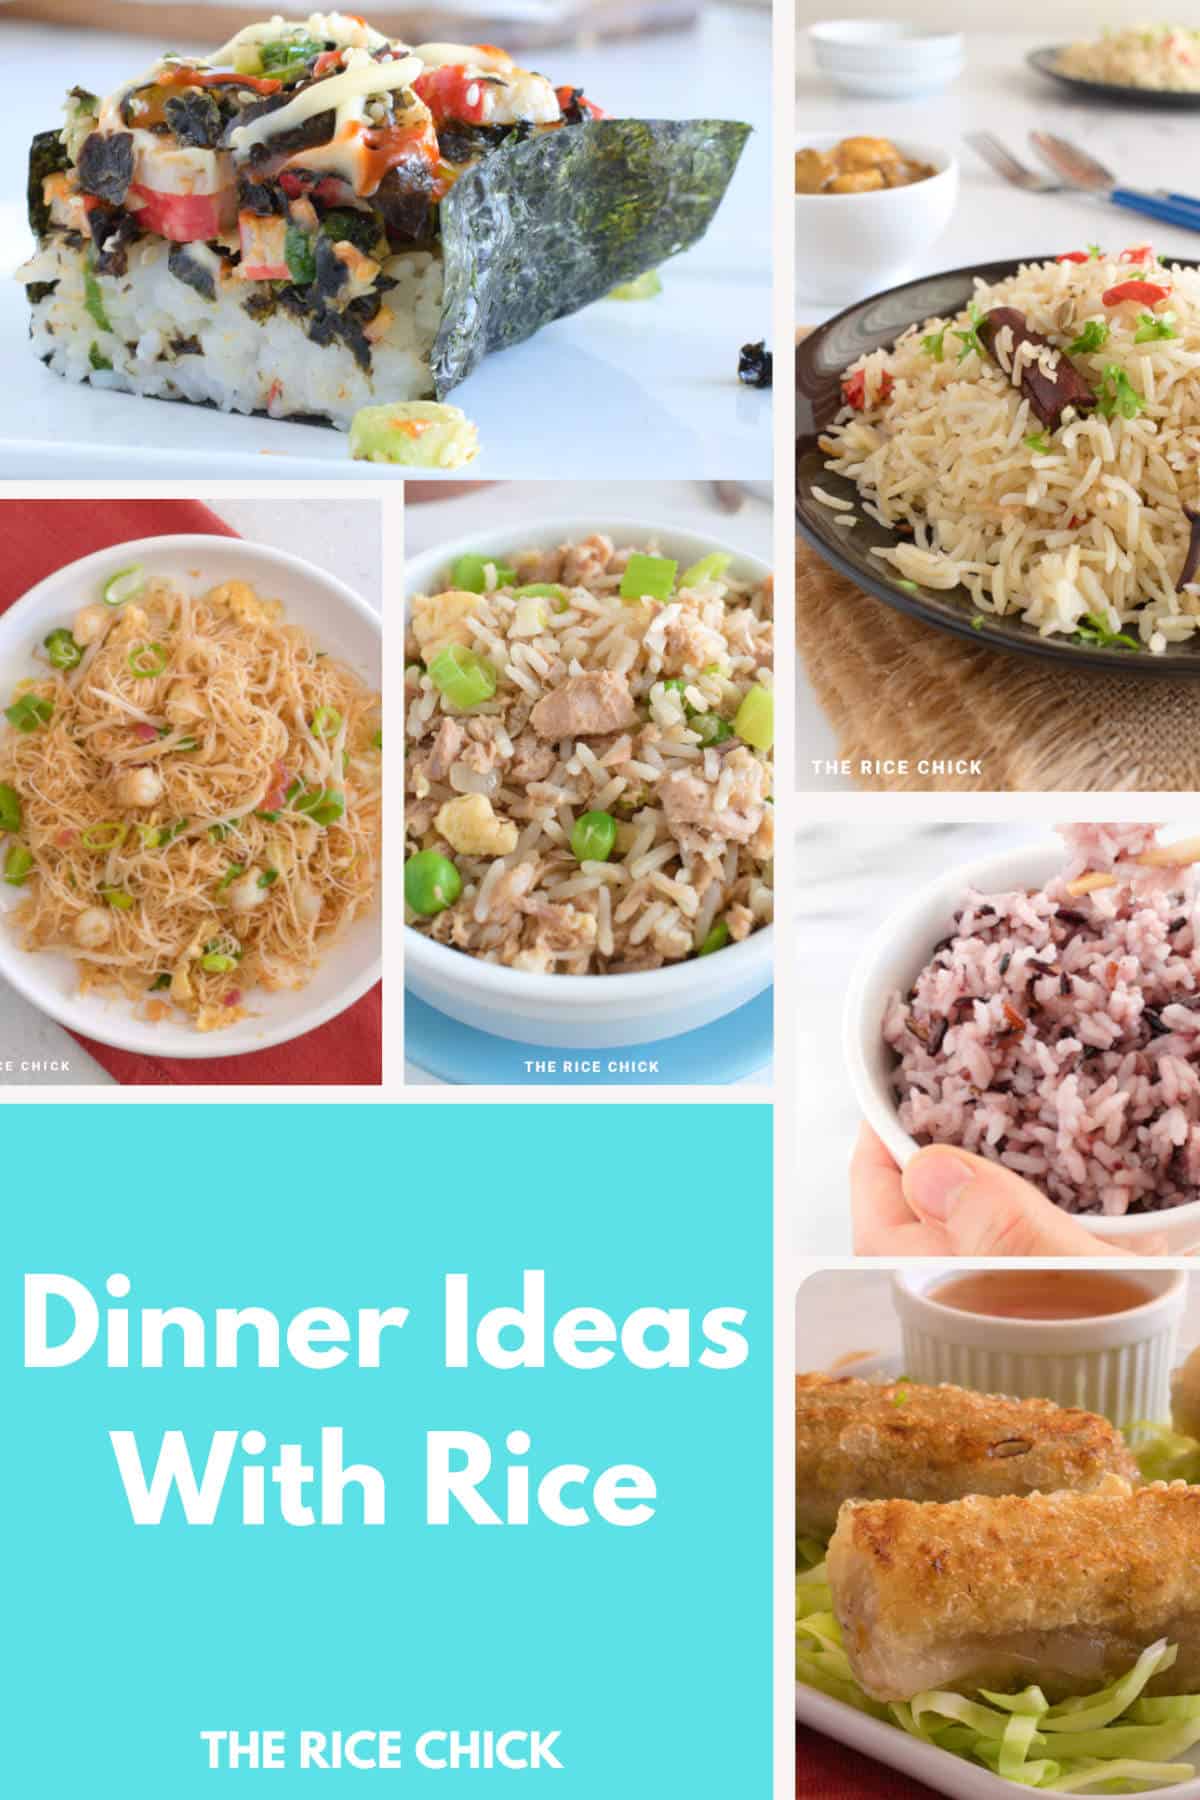 A collection of images of rice dishes including pad mee, sushi bake, tuna fried rice, purple Korean rice, crispy rice paper rolls, and jeera rice.